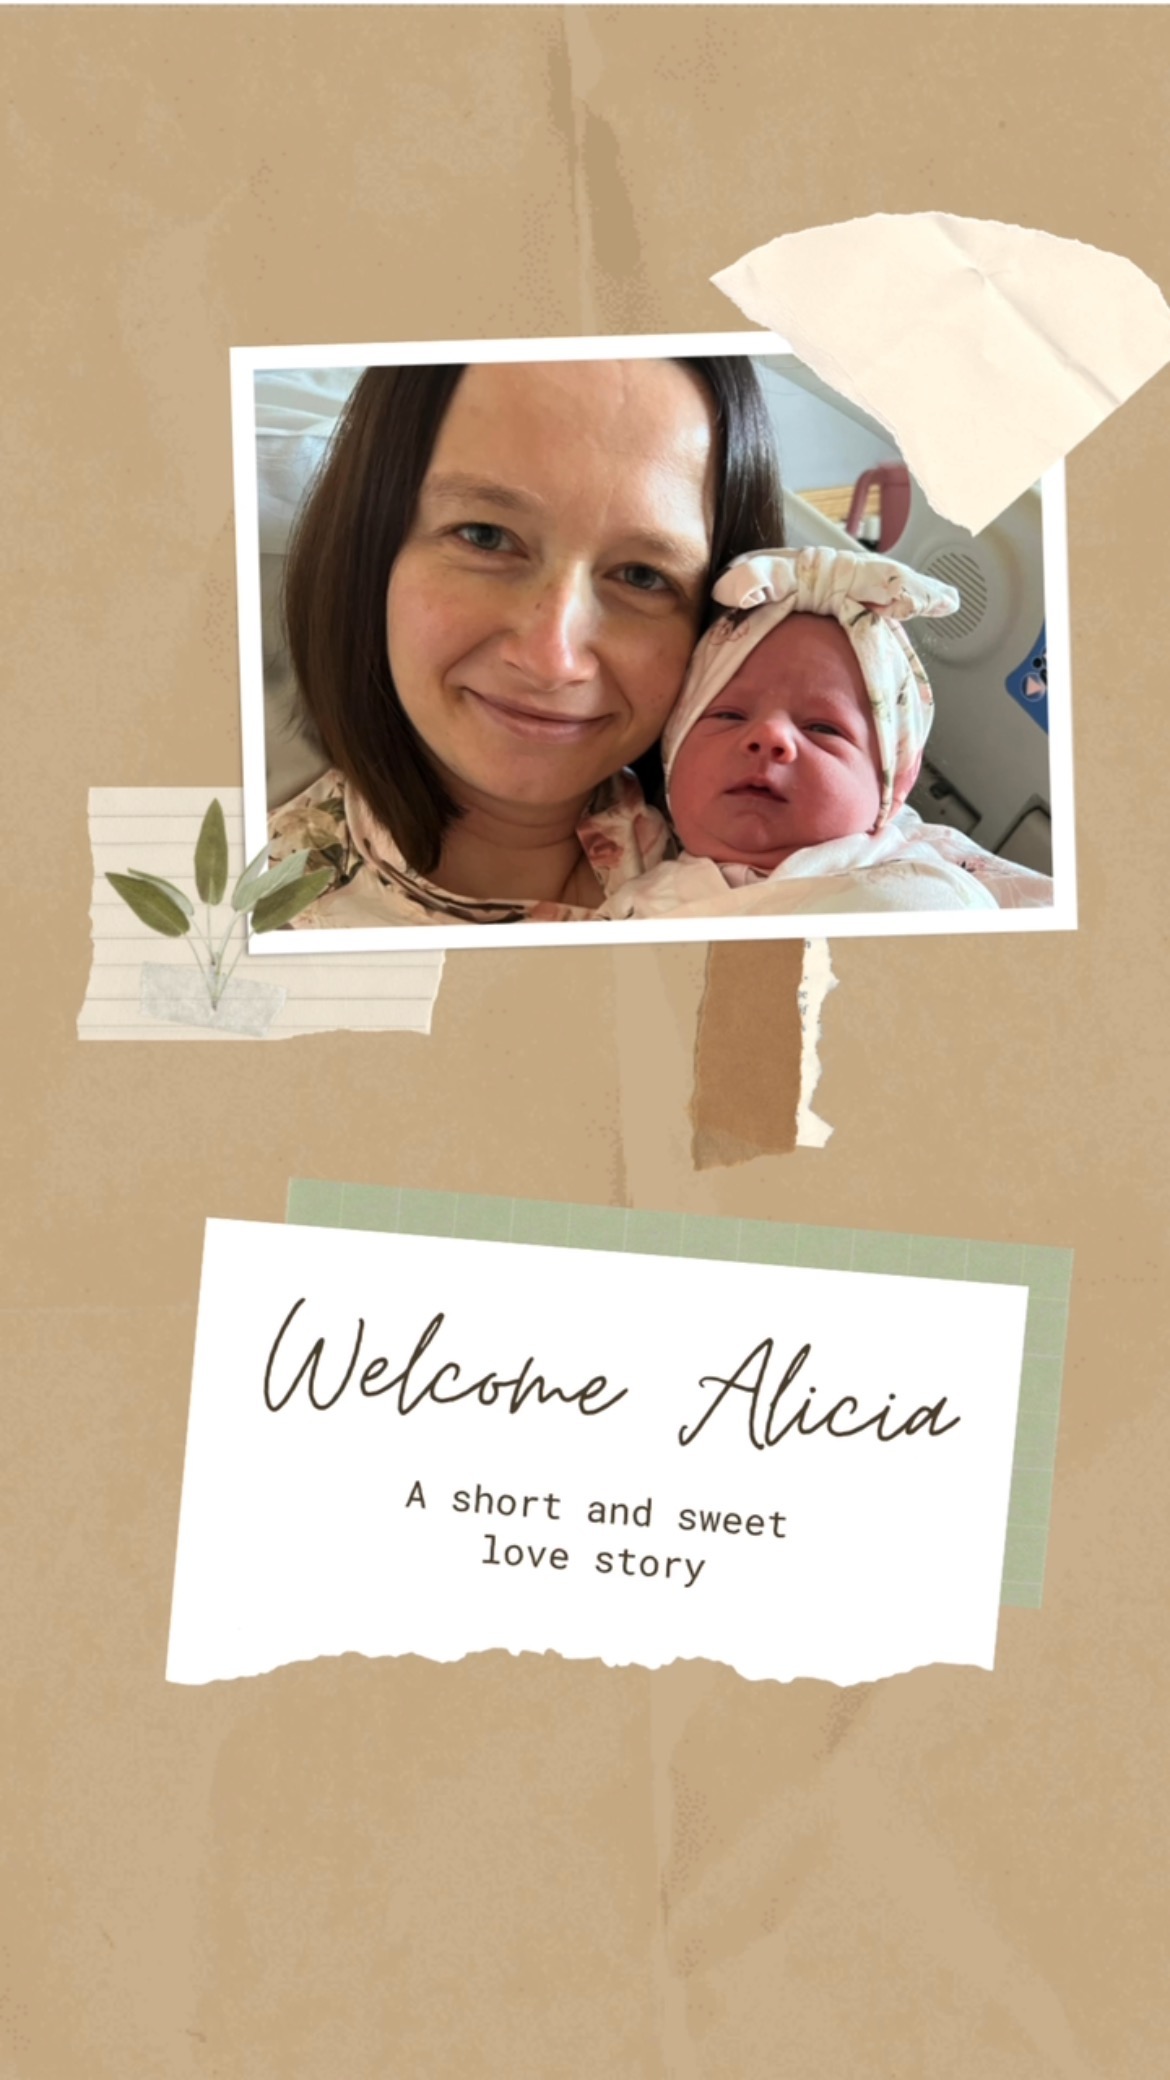 I can finally introduce my little sweet girl Alicia Maria. She was born 7/9/22 weighing 7lb 3oz and measuring 21.5 inches. We are beyond blessed with the support we received. Thank you for all the phone calls, messages, gifts, meals and all. We couldn’t do it all without the support of our family and friends! It was an intense first week. We are in love and enjoy getting to know each other. I can’t wait to share more of our breastfeeding journey!